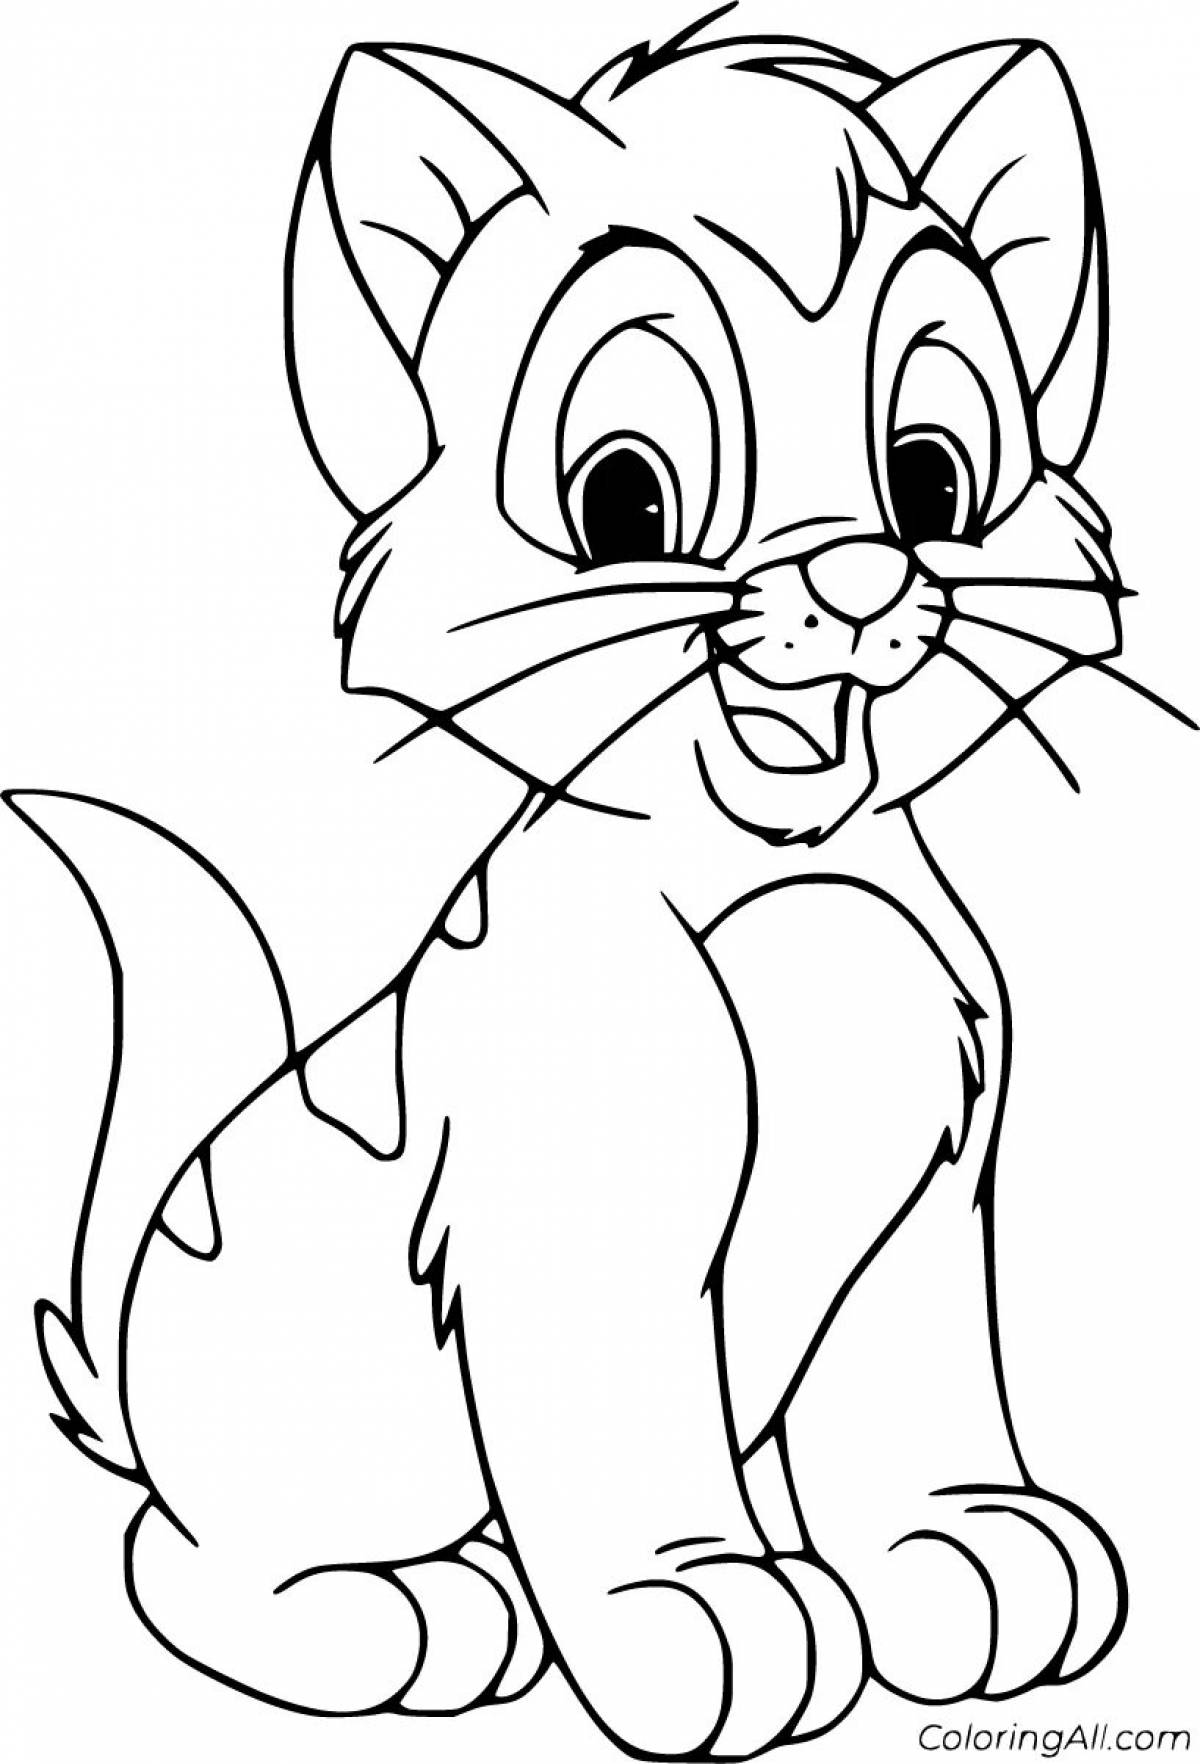 Exquisite oliver and company coloring